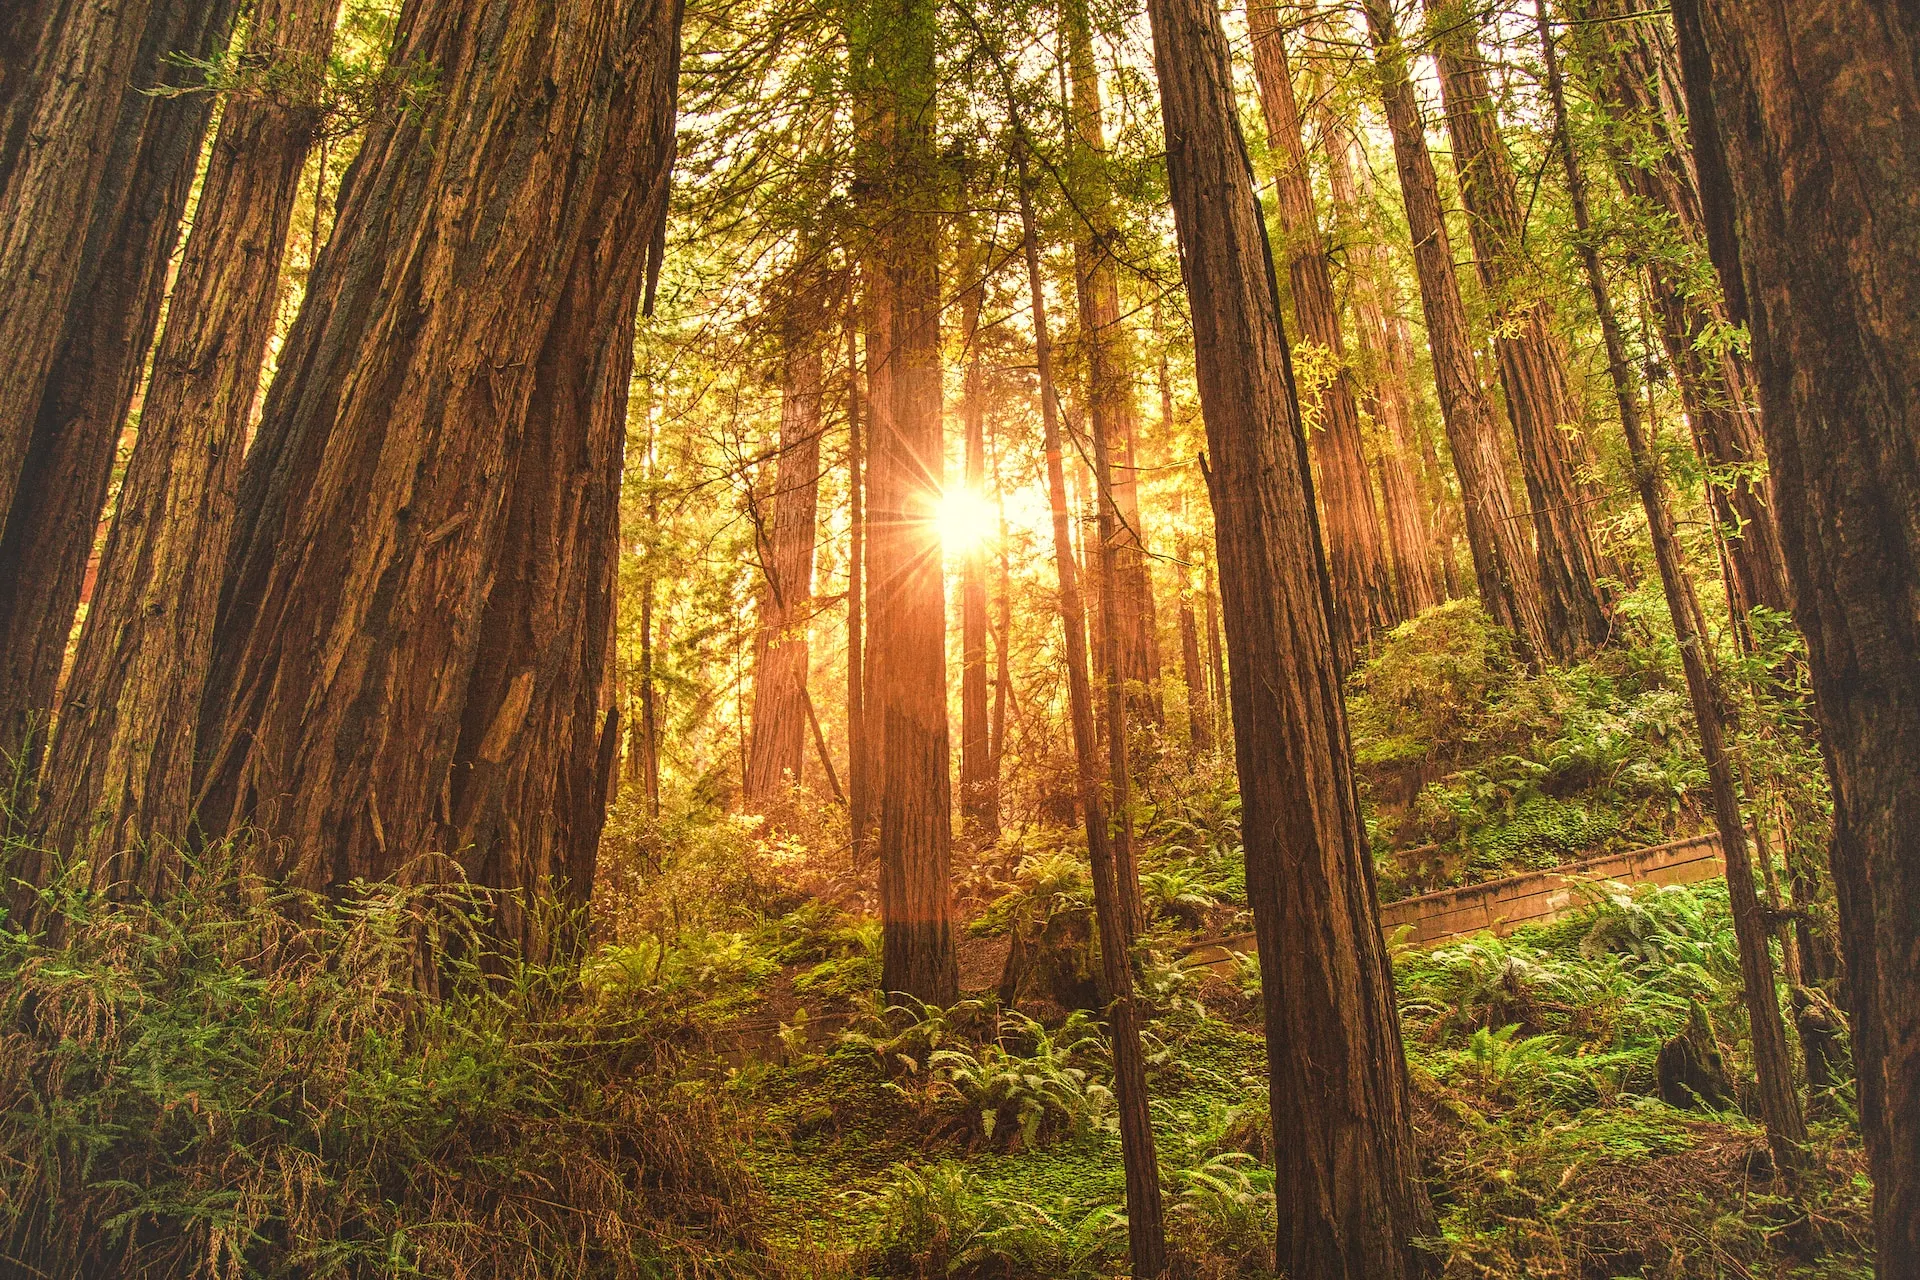 Explore Redwood National Park with our comprehensive guide, including tips on when to visit, where to stay, must-see attractions, and how to make the most of your trip.